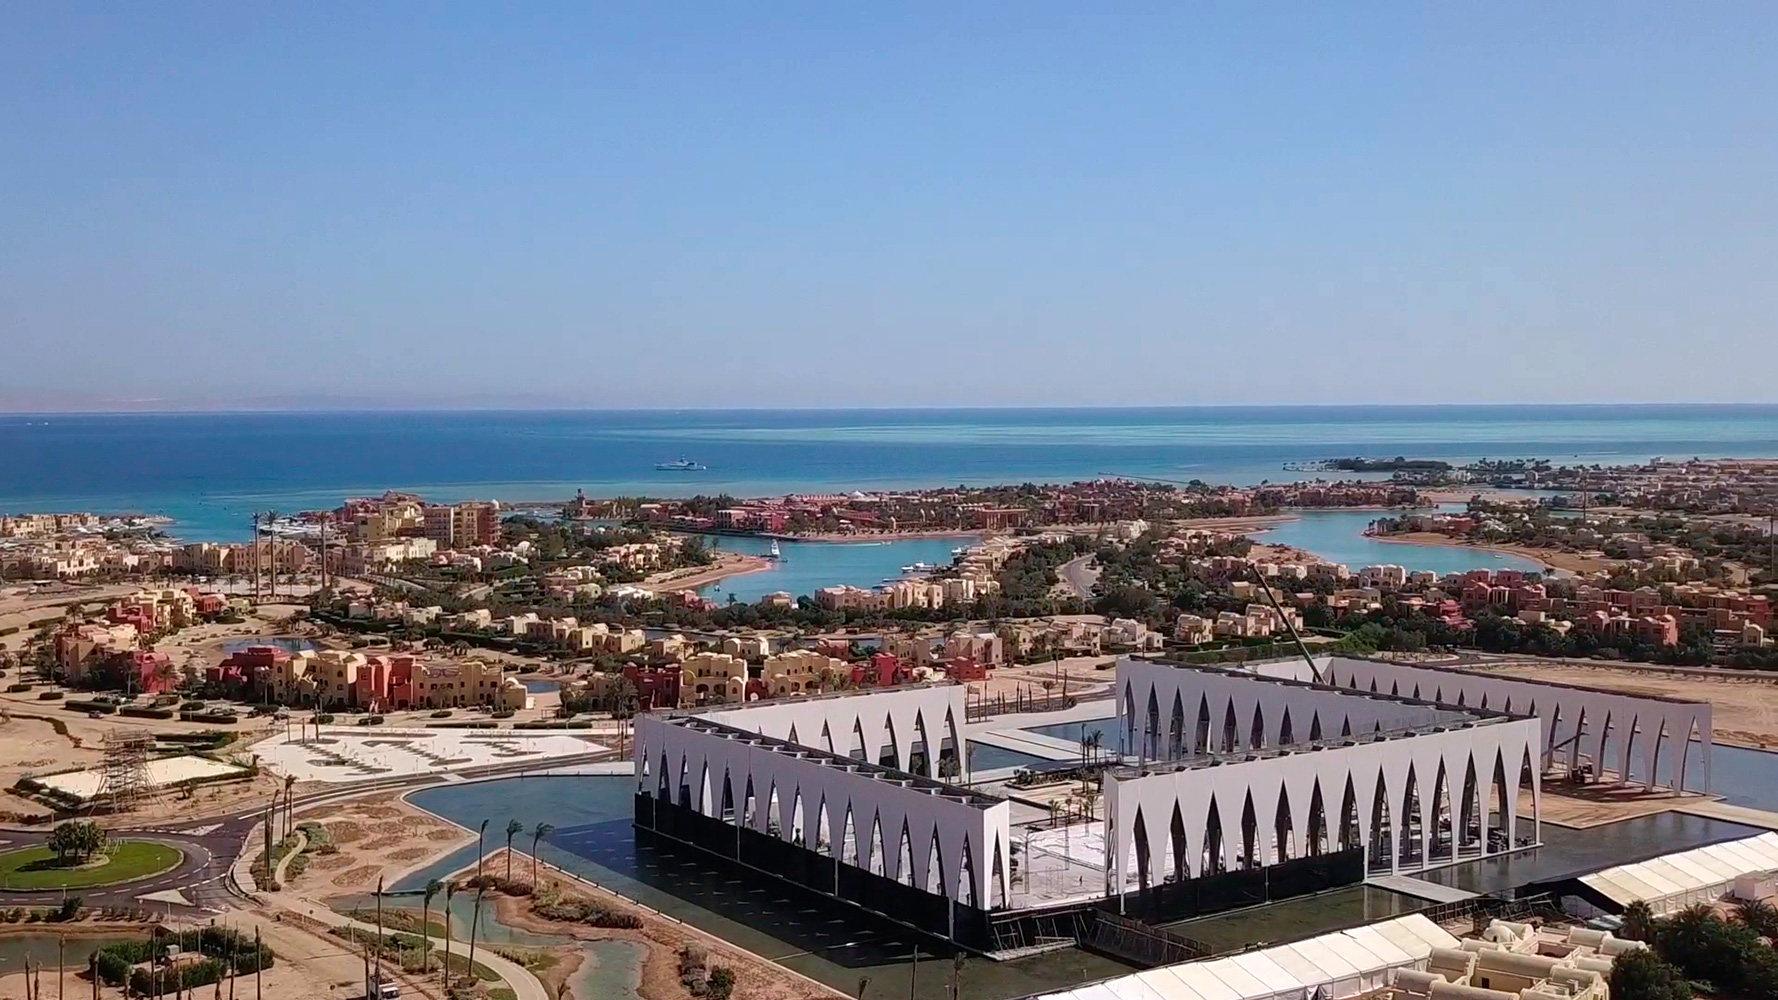 El Gouna Conference and Culture Center